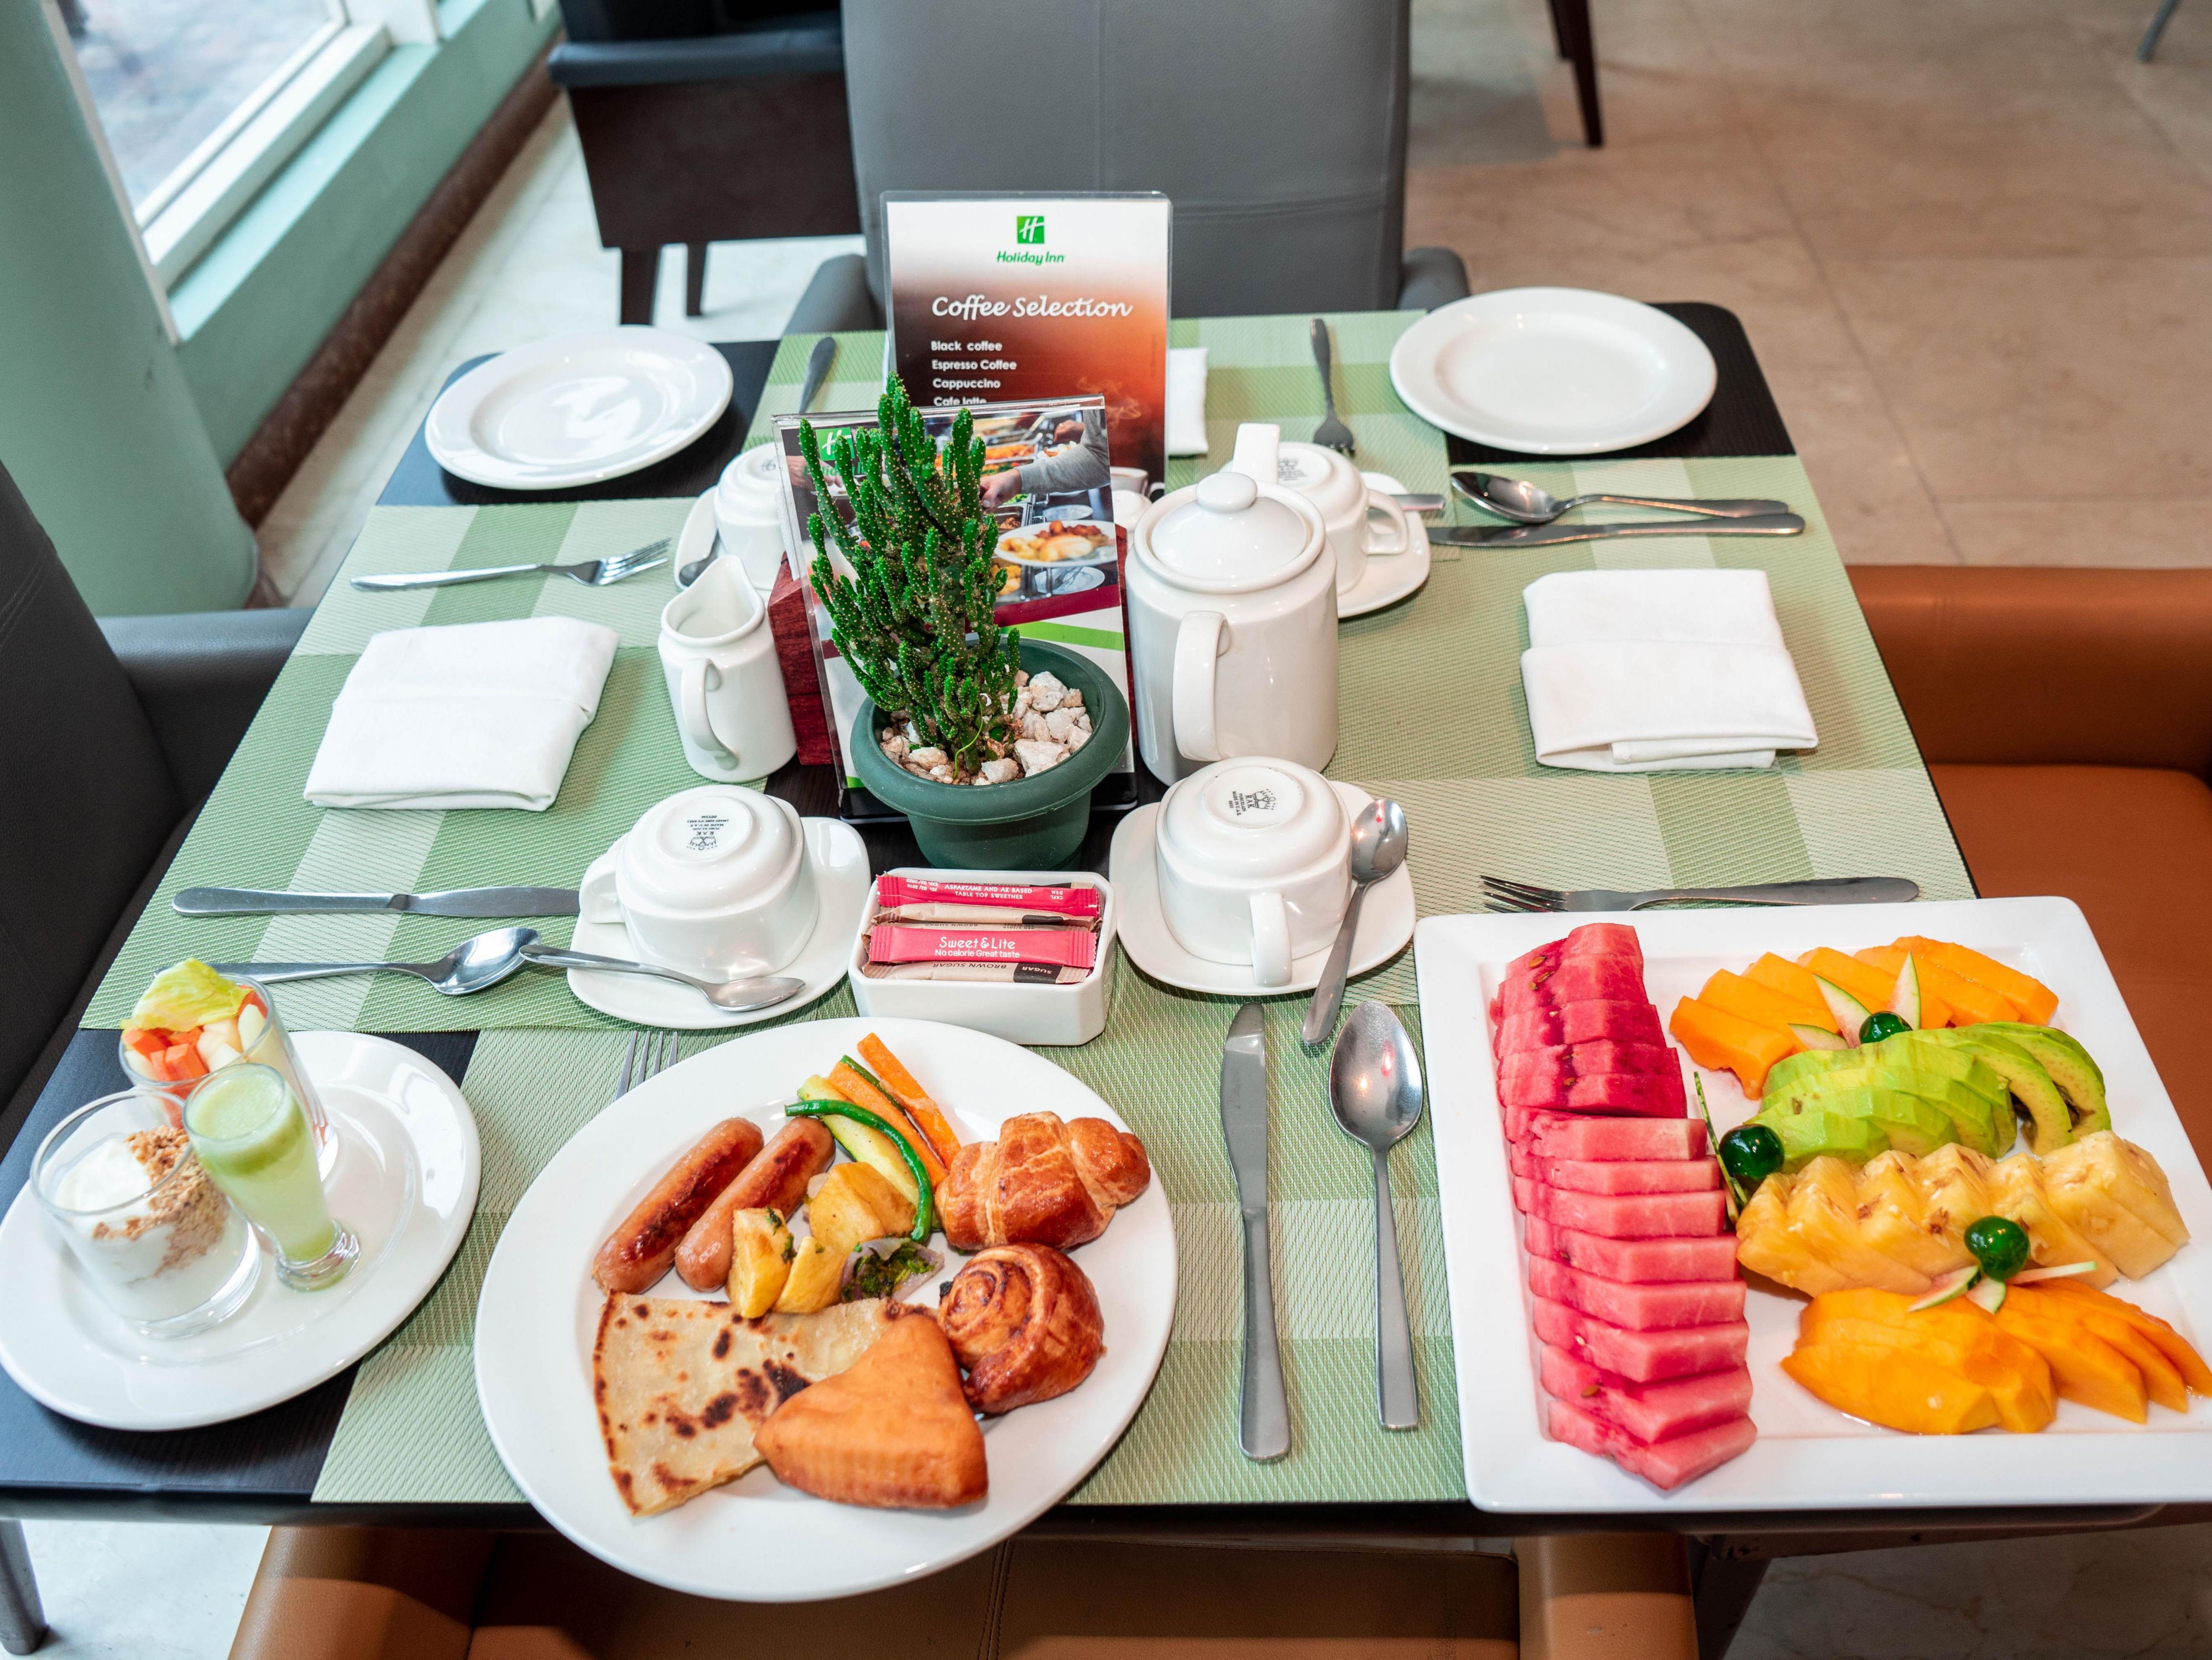 Enjoy the Full buffet breakfast everyday from 06:00 hrs till 10:00 hrs with wide variety of AFRO- Intercontinental cuisine